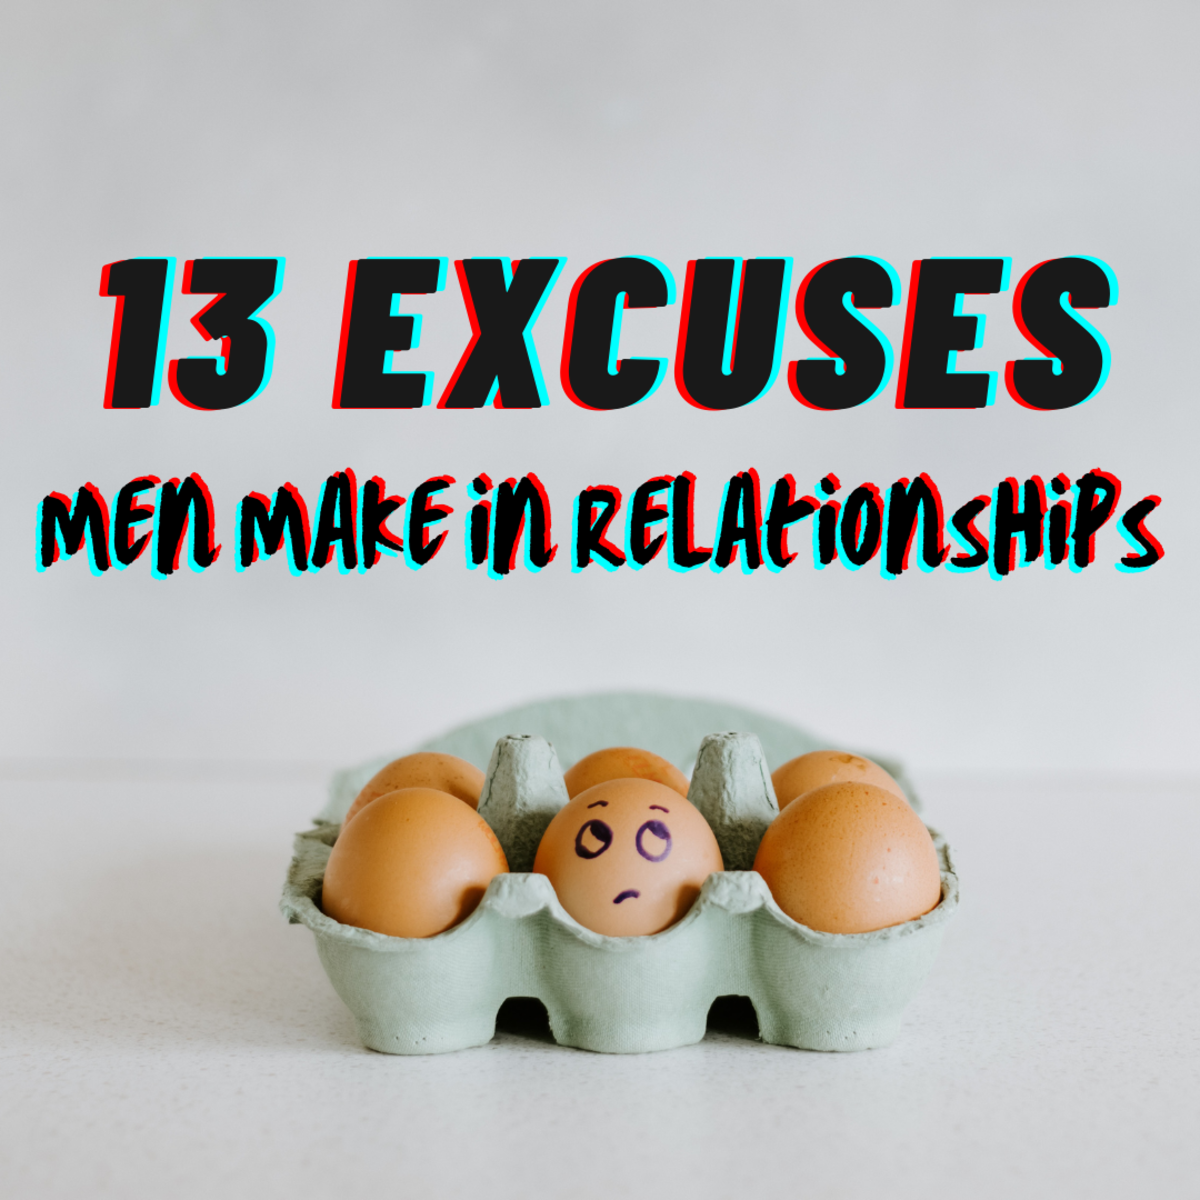 Read on to learn about the top 13 excuses men make in relationships and what they might mean.